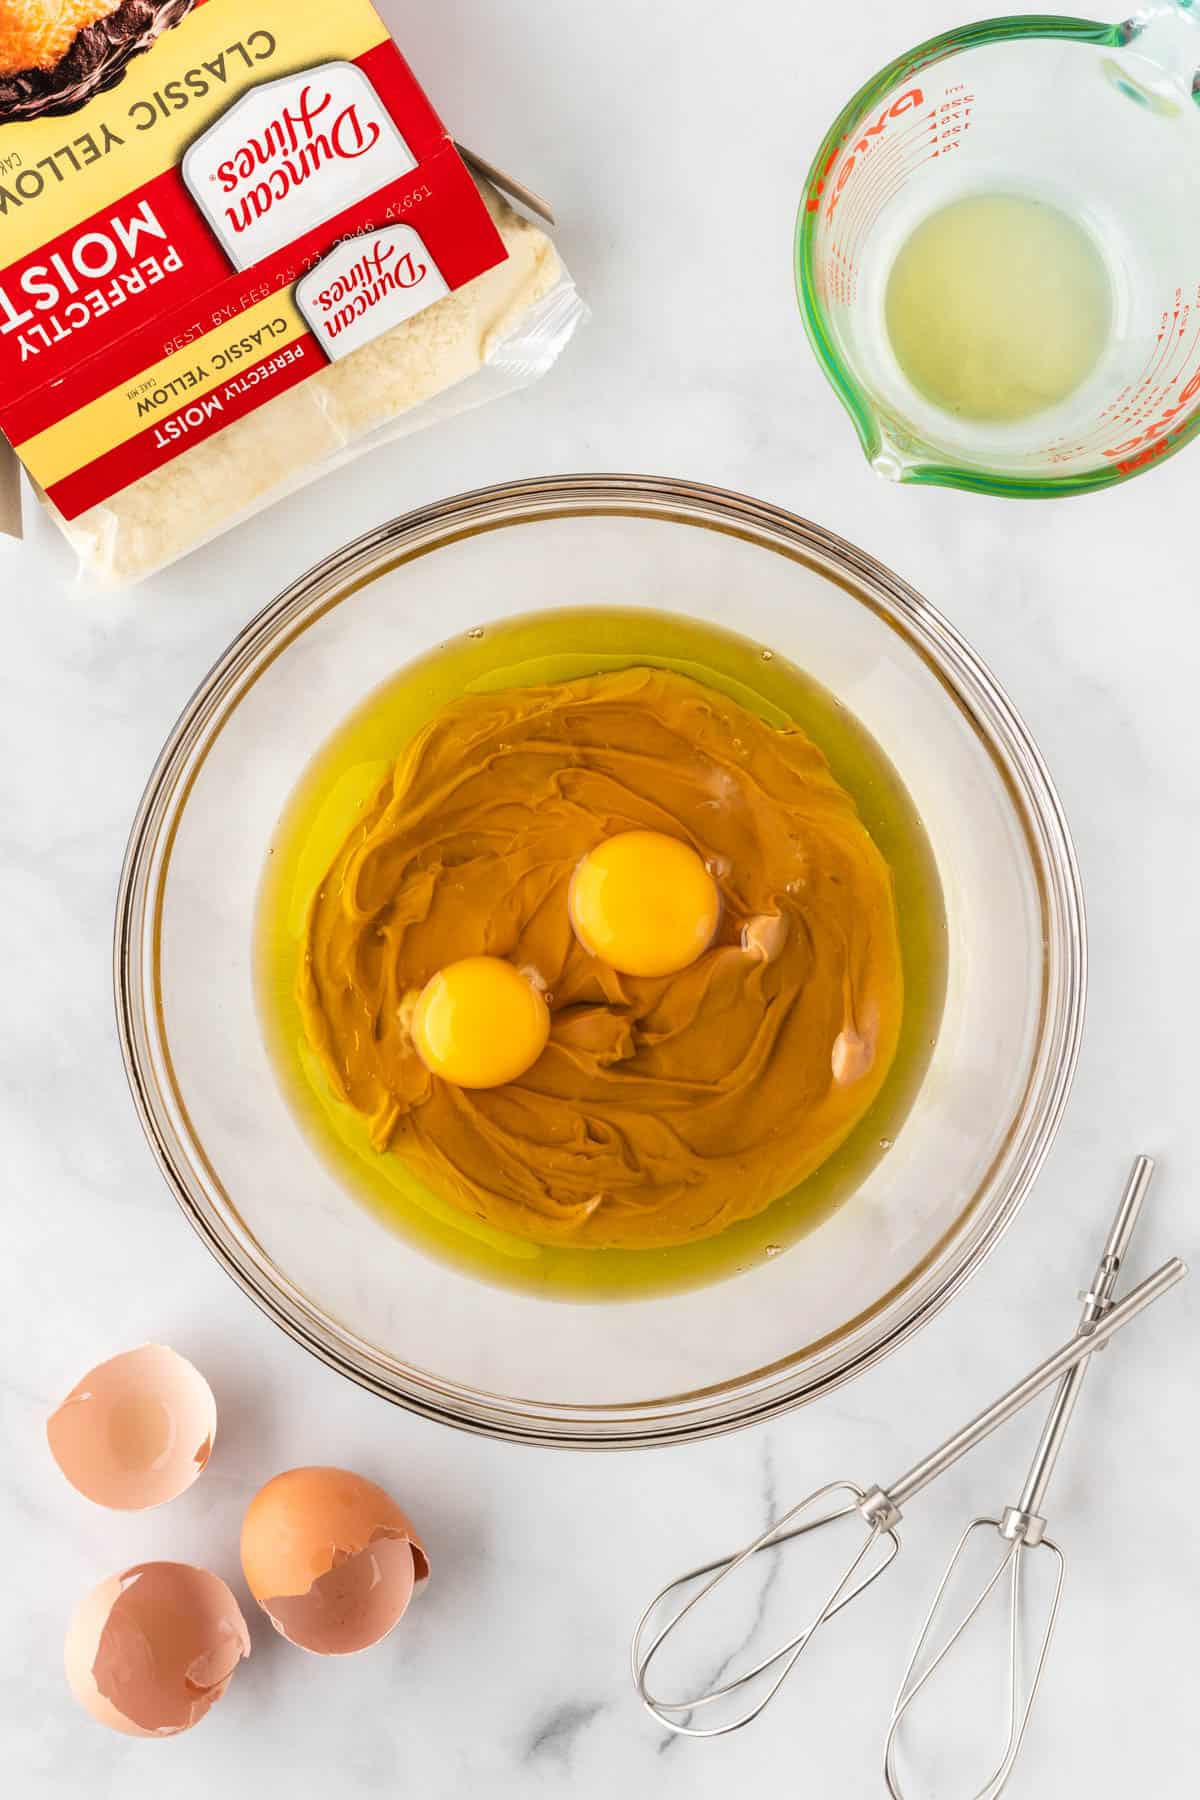 eggs, oil, and peanut butter in a mixing bowl